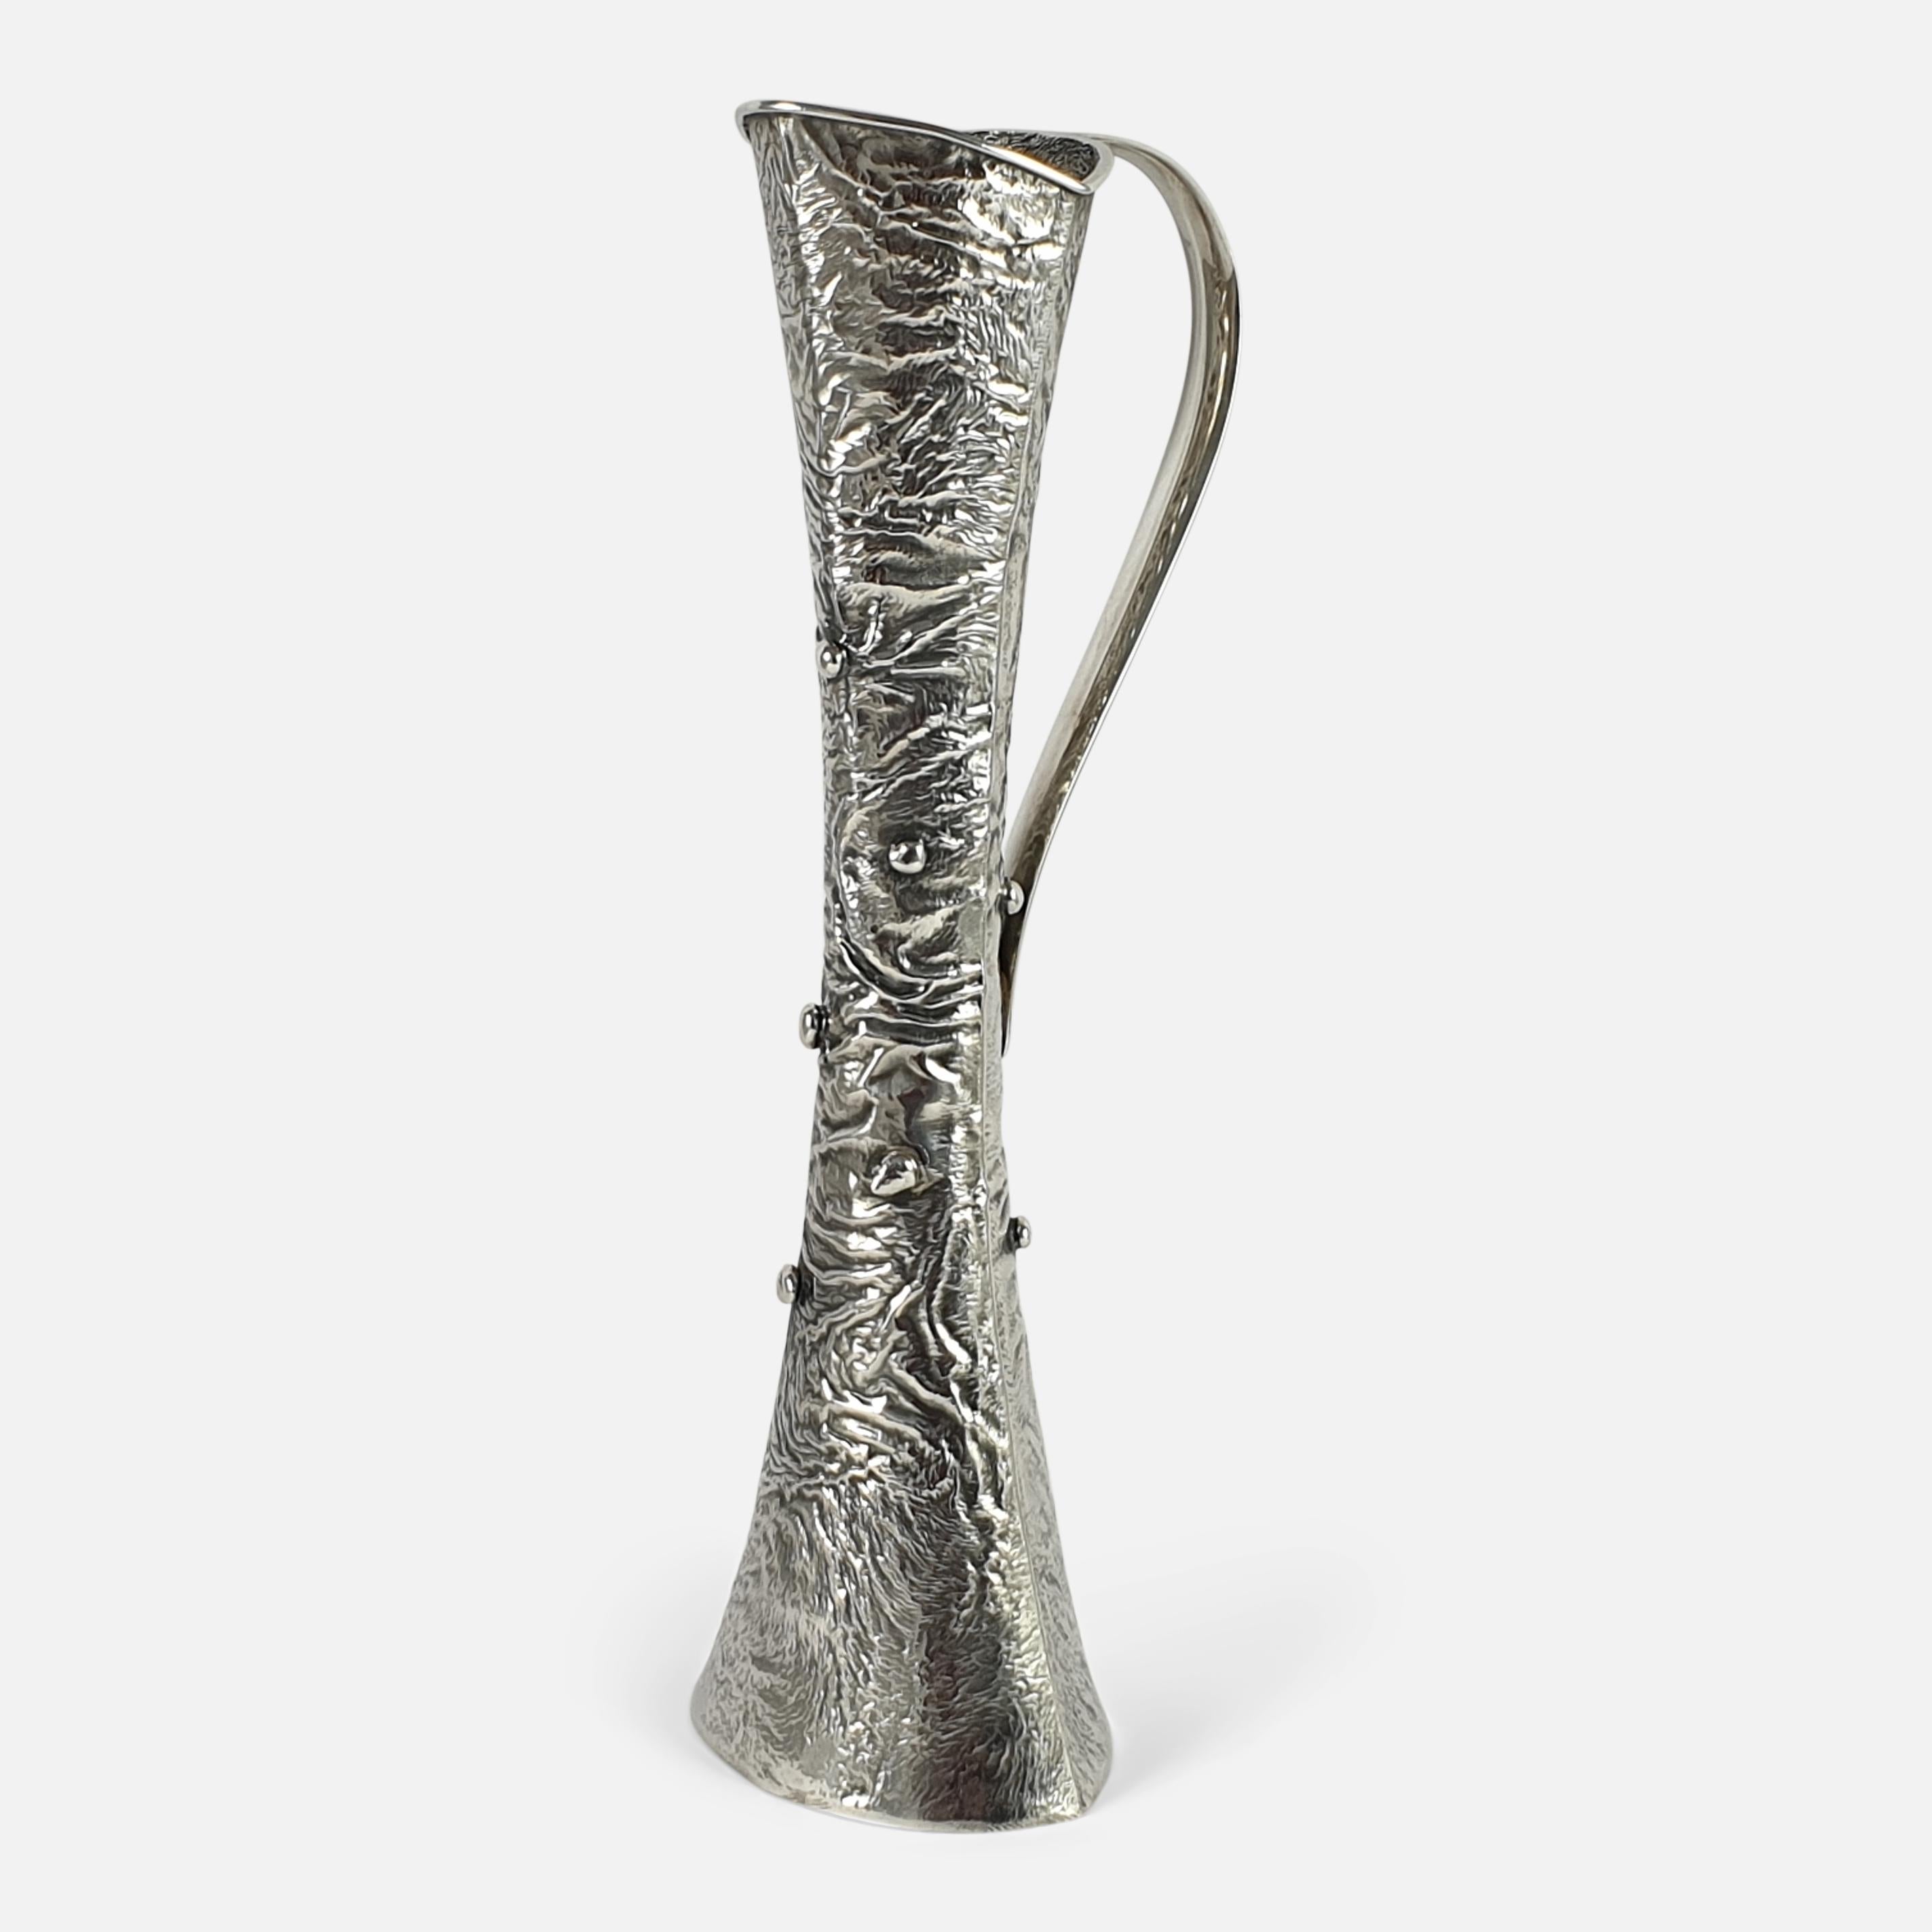 A silver bud vase made by Kultakeskus Oy, Hämeenlinna, Finland, 1972. The bud vase is crafted using the Samorodok technique, and it is of trumpet form, with a single handle. The vase is stamped with the Kultakeskus Oy makers mark (crouching lion),